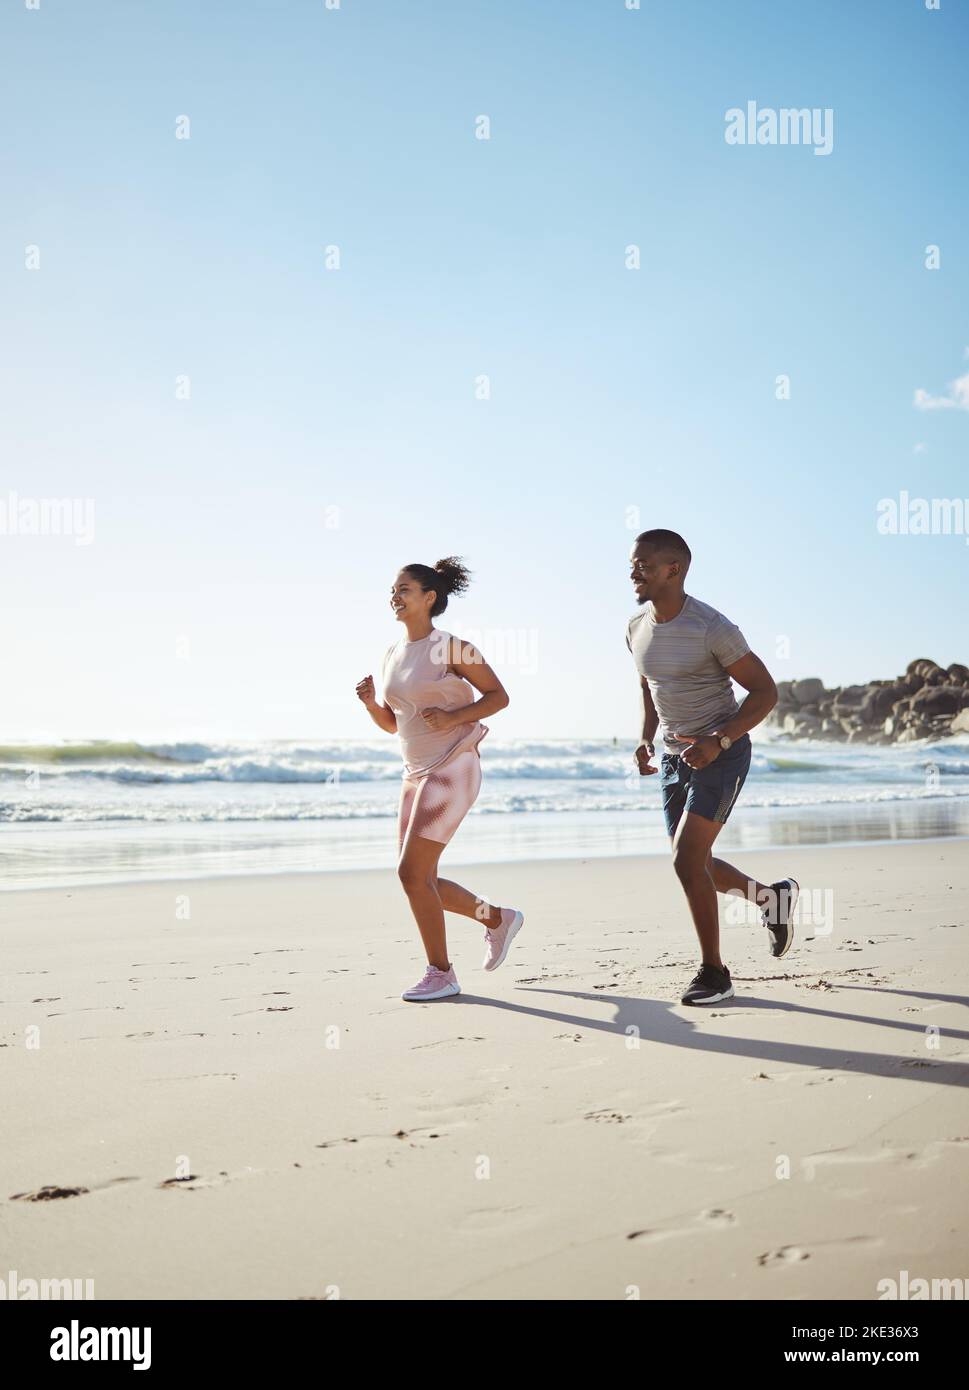 Beach, couple running and cardio fitness training or wellness challenge together. Friends, sports teamwork run and healthy runner lifestyle motivation Stock Photo